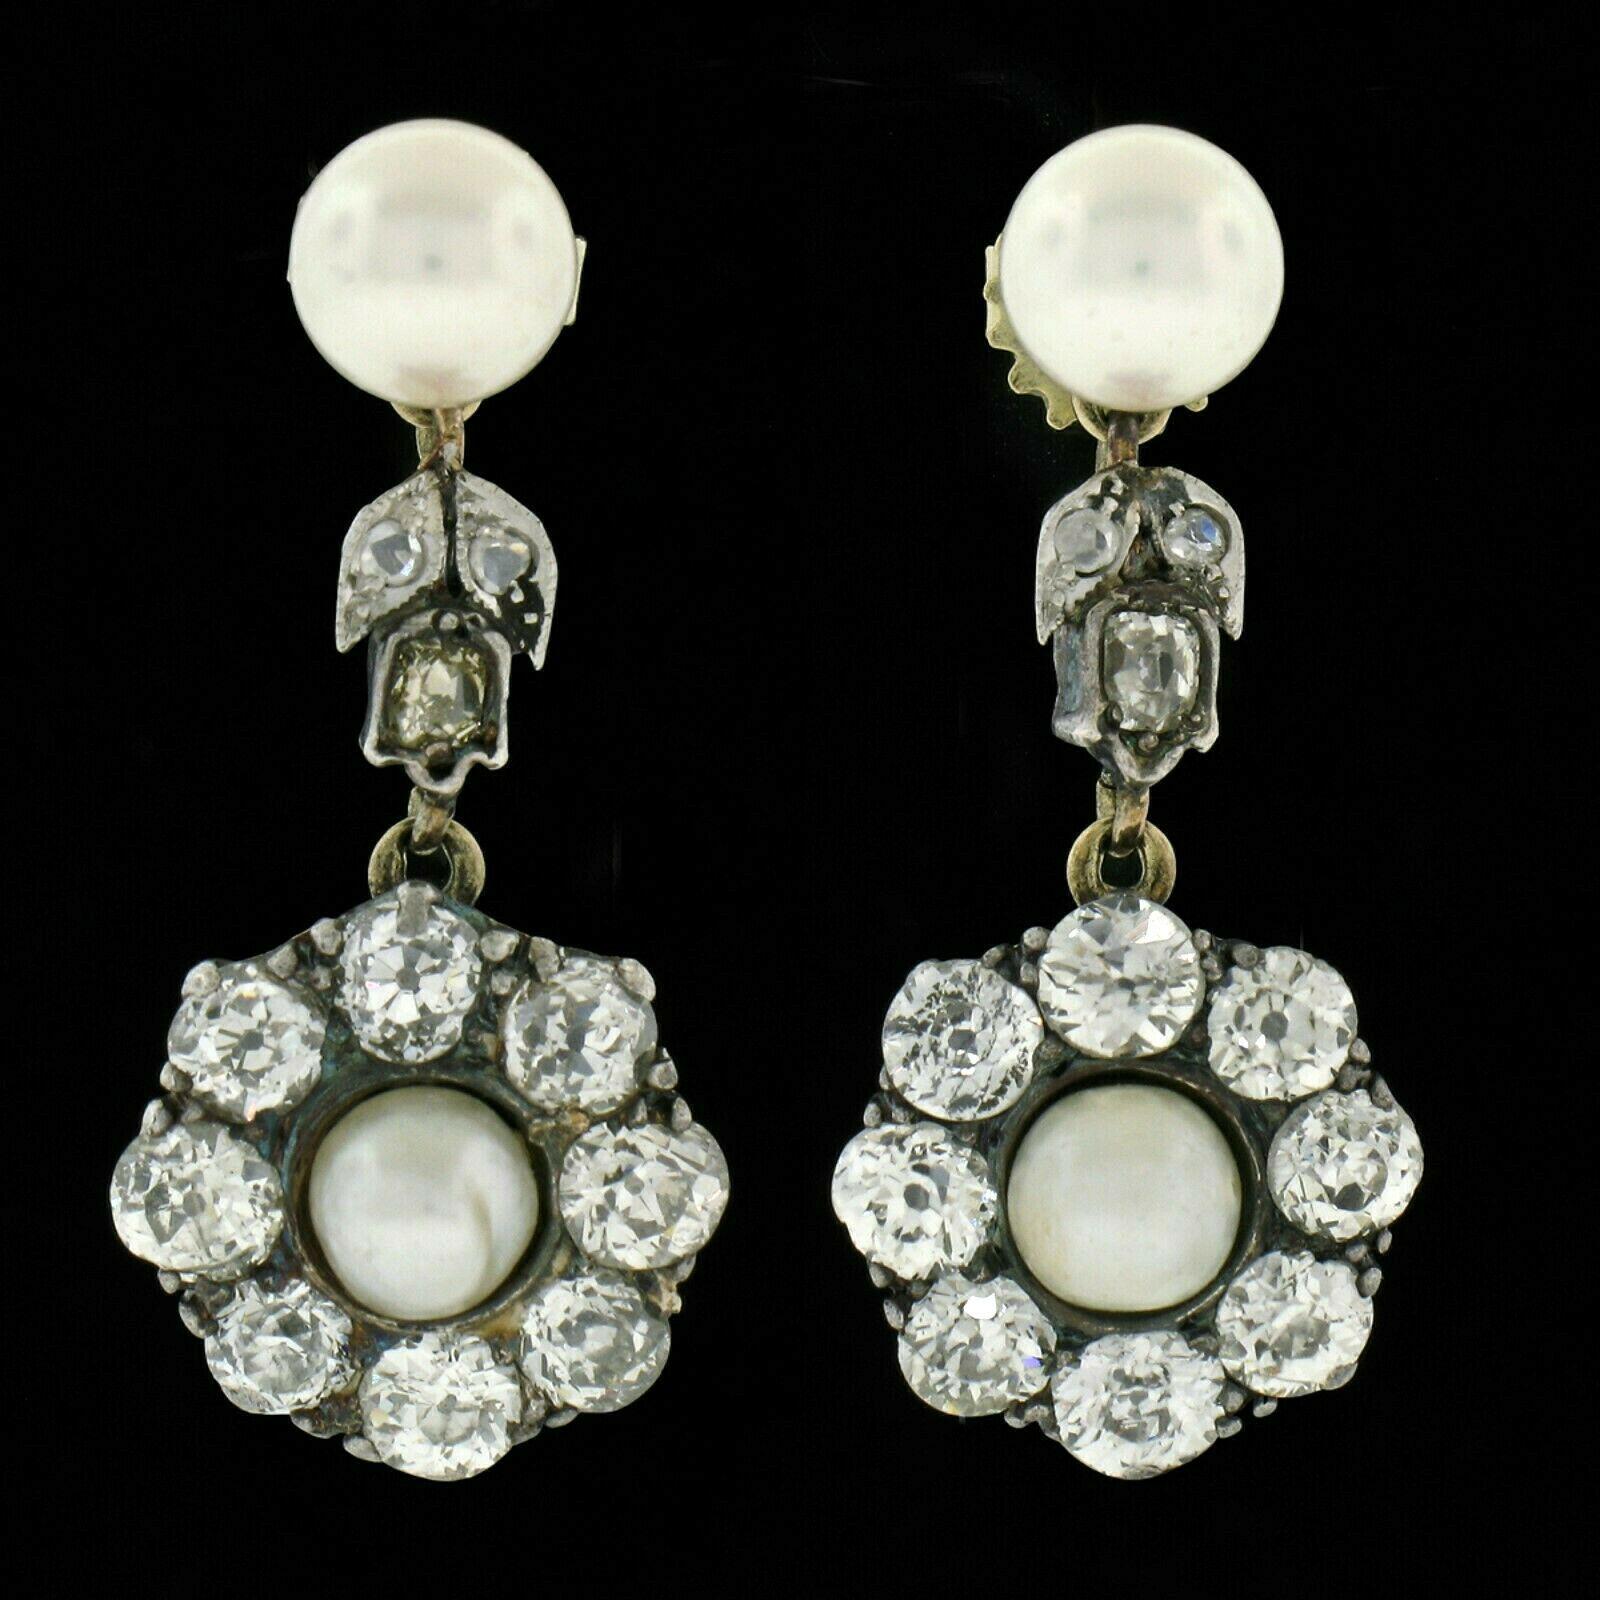 This gorgeous pair of antique earrings was crafted in solid 14k gold and solid silver top in the early 19th century during the Georgian period. Both earrings feature a solitaire, natural pearl stone surrounded by a halo that is structured from old